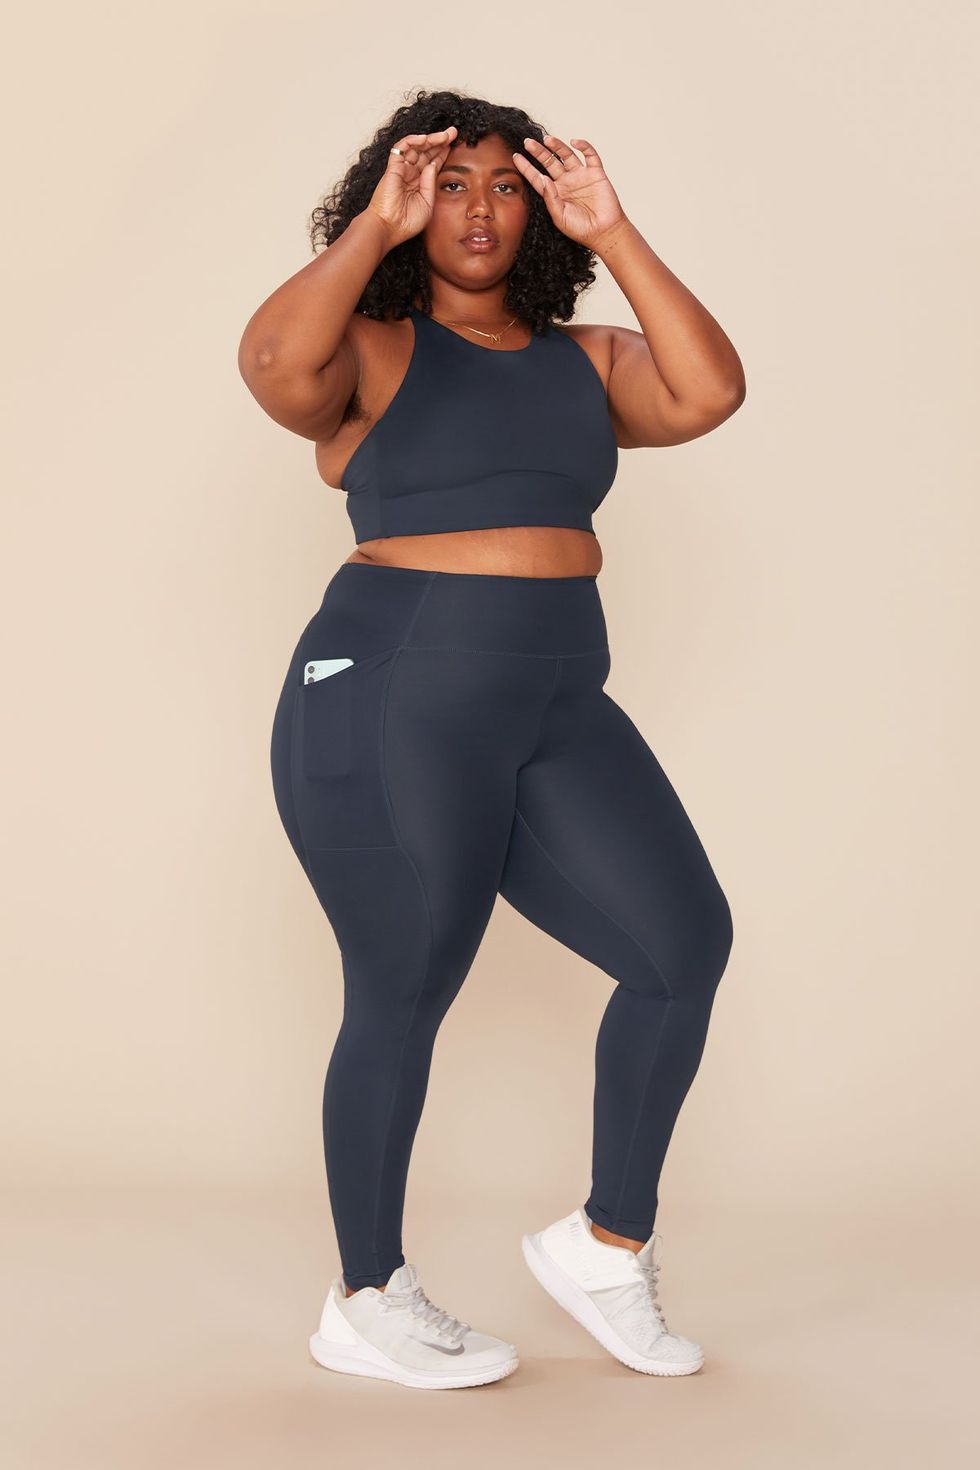 Where to buy plus-size activewear that is comfortable yet trendy